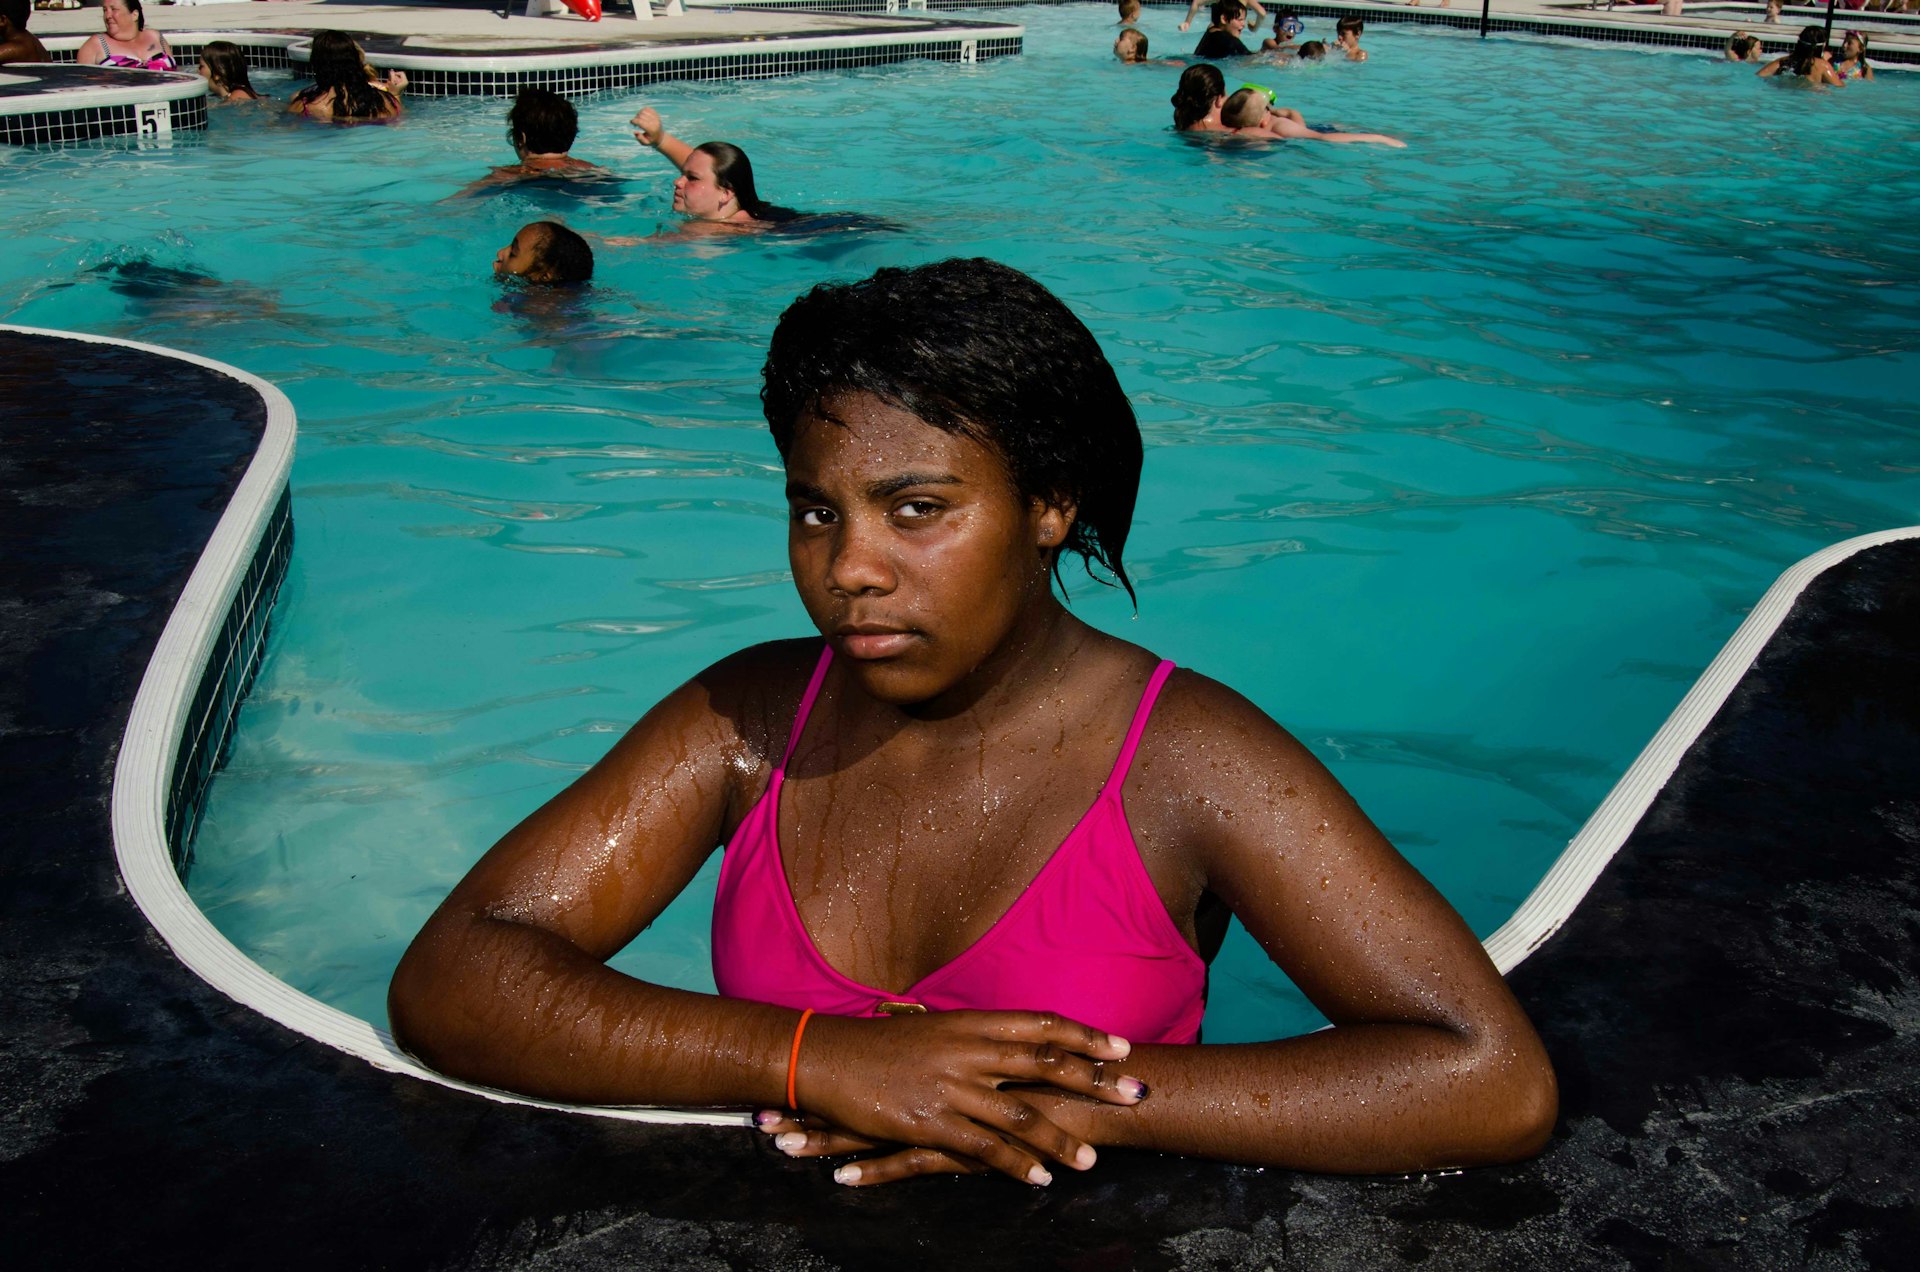 Blurring fantasy and reality in America's poorest region